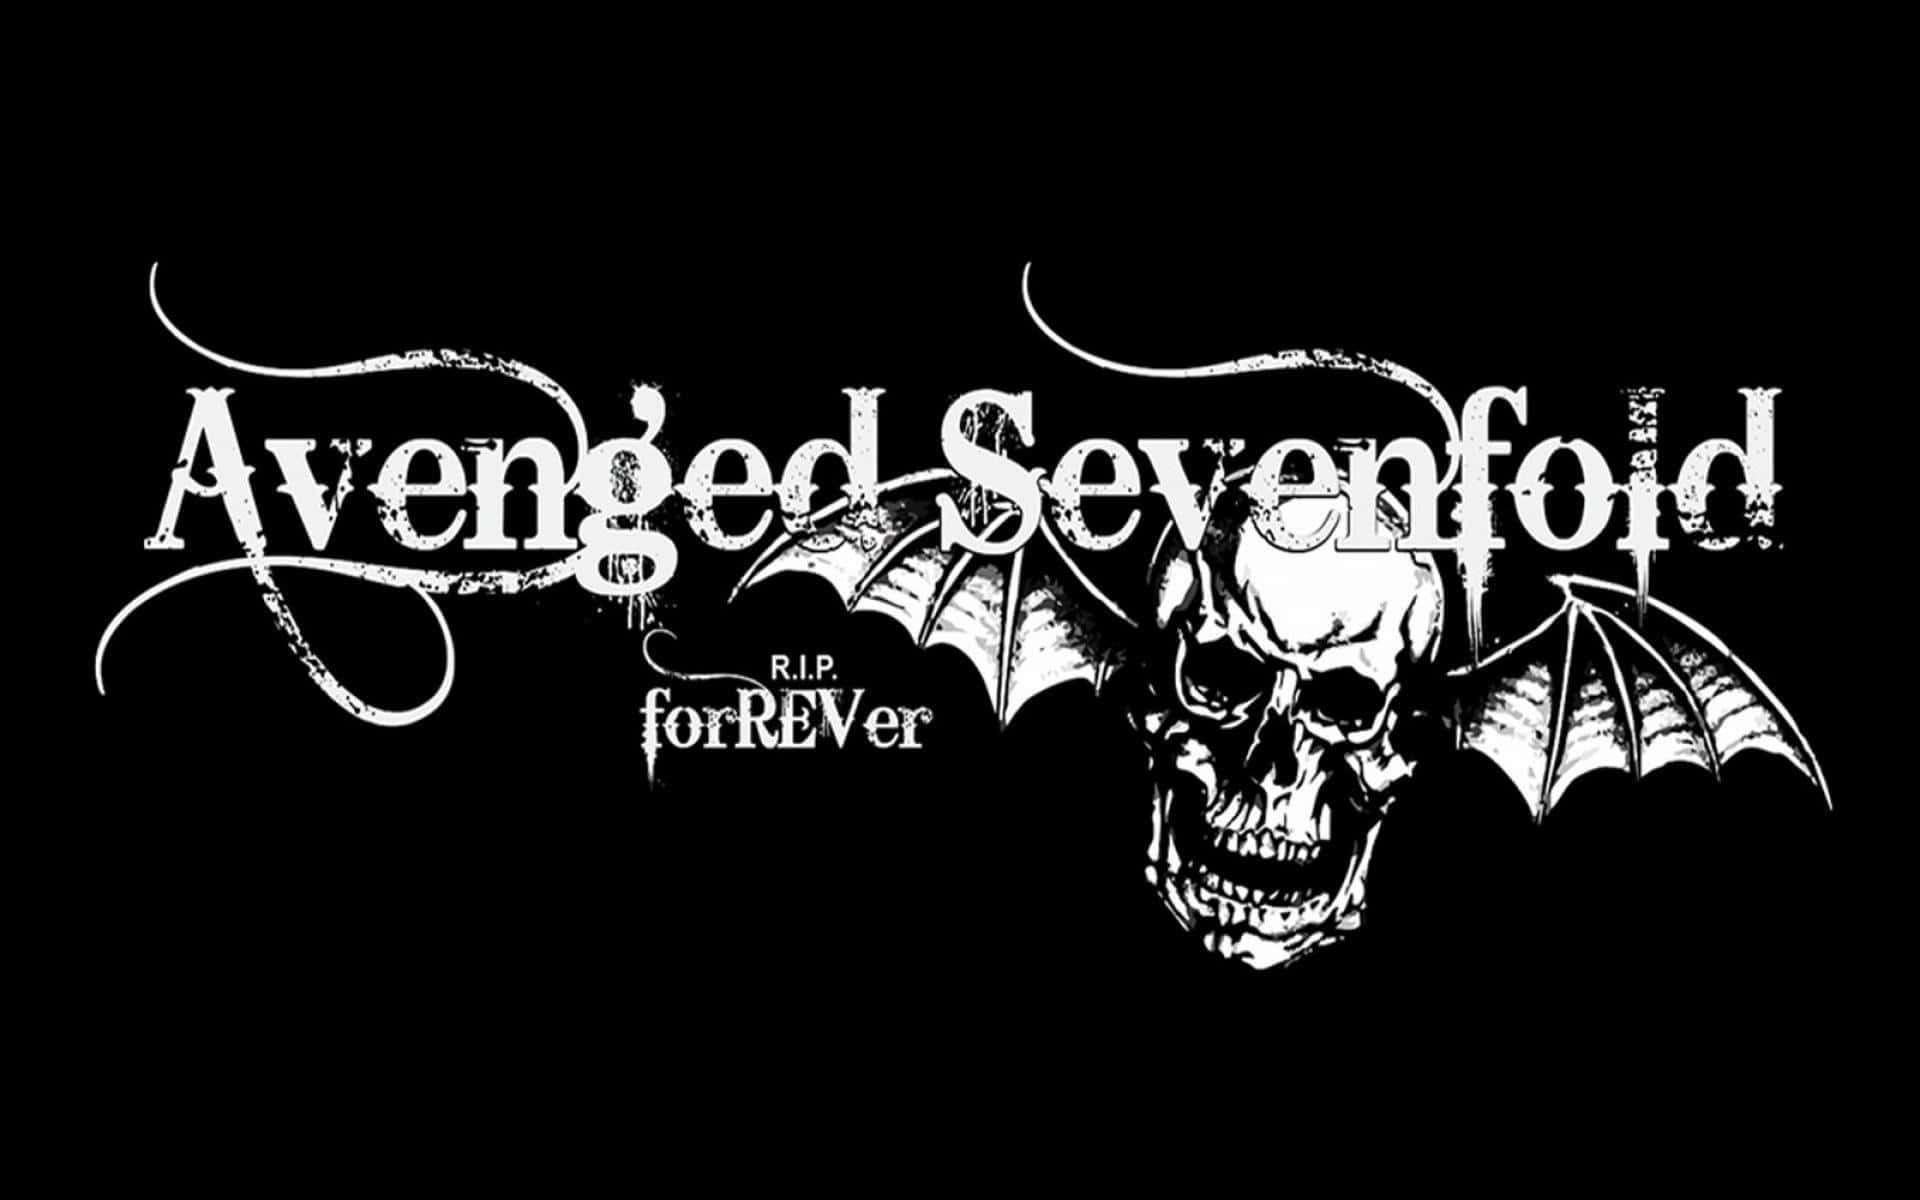 Enjoy The Music Of Avenged Sevenfold On Your iPhone Wallpaper